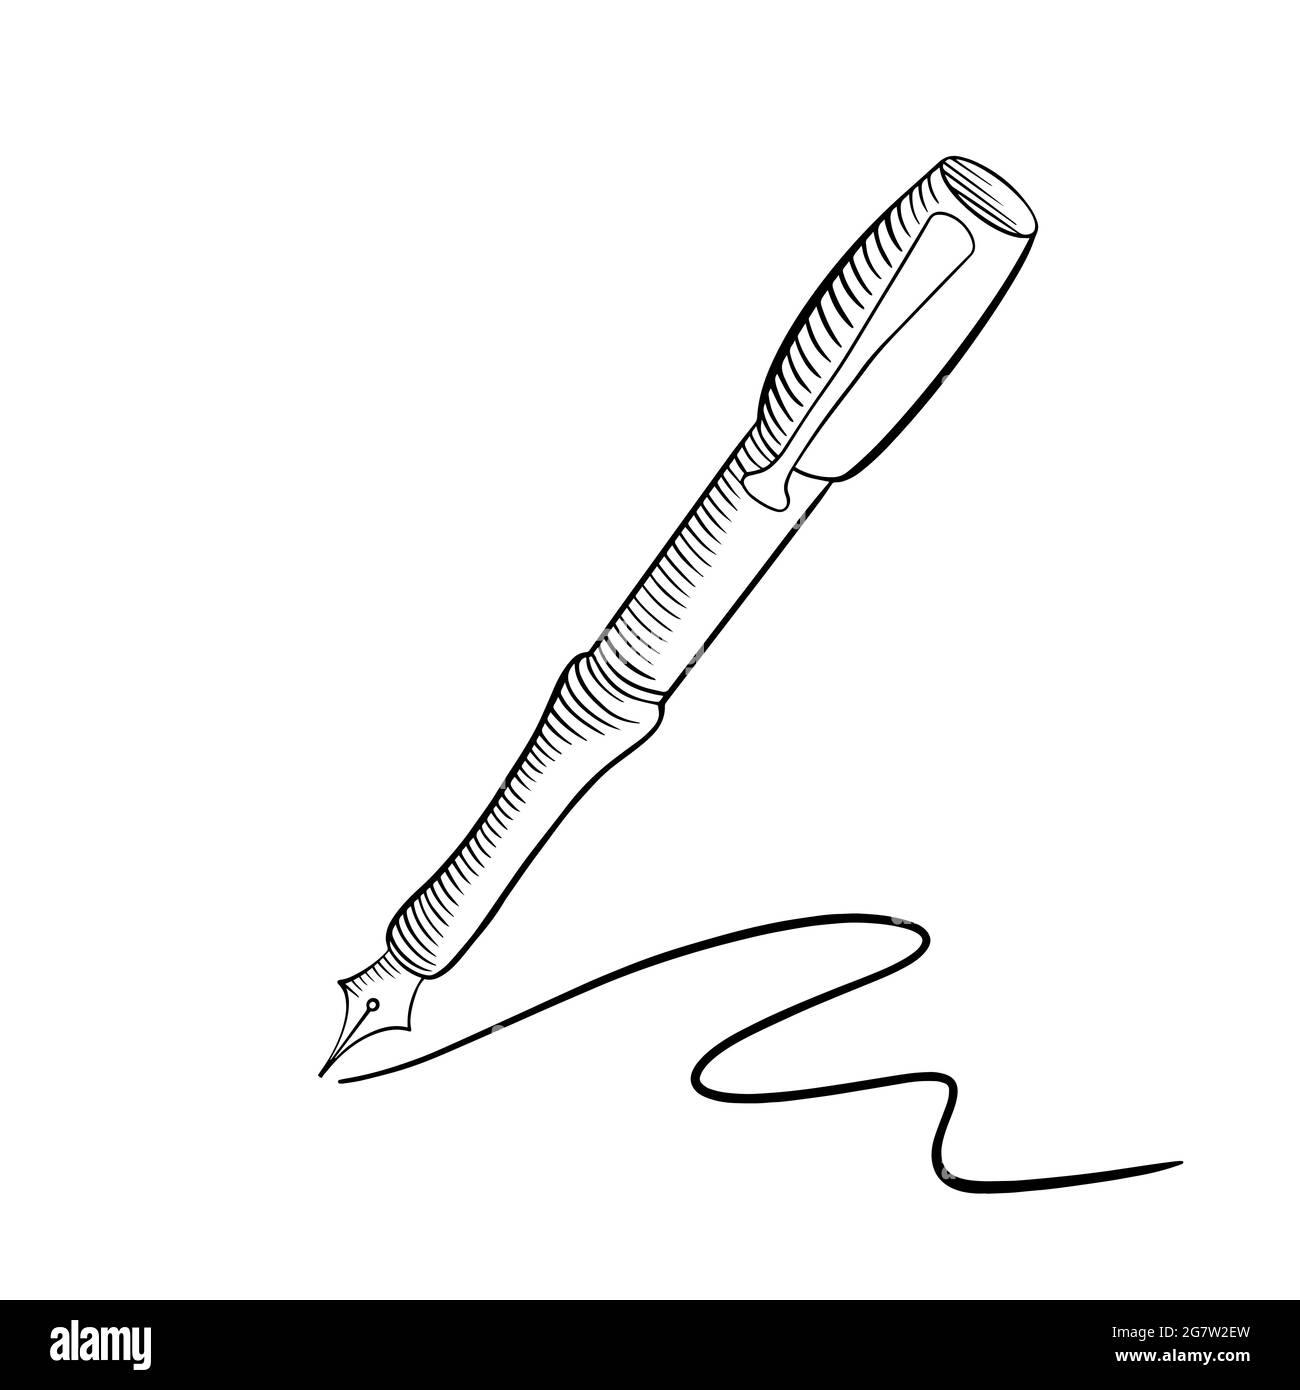 Hand drawn fountain pen with stroke. Black doodle on white background ...